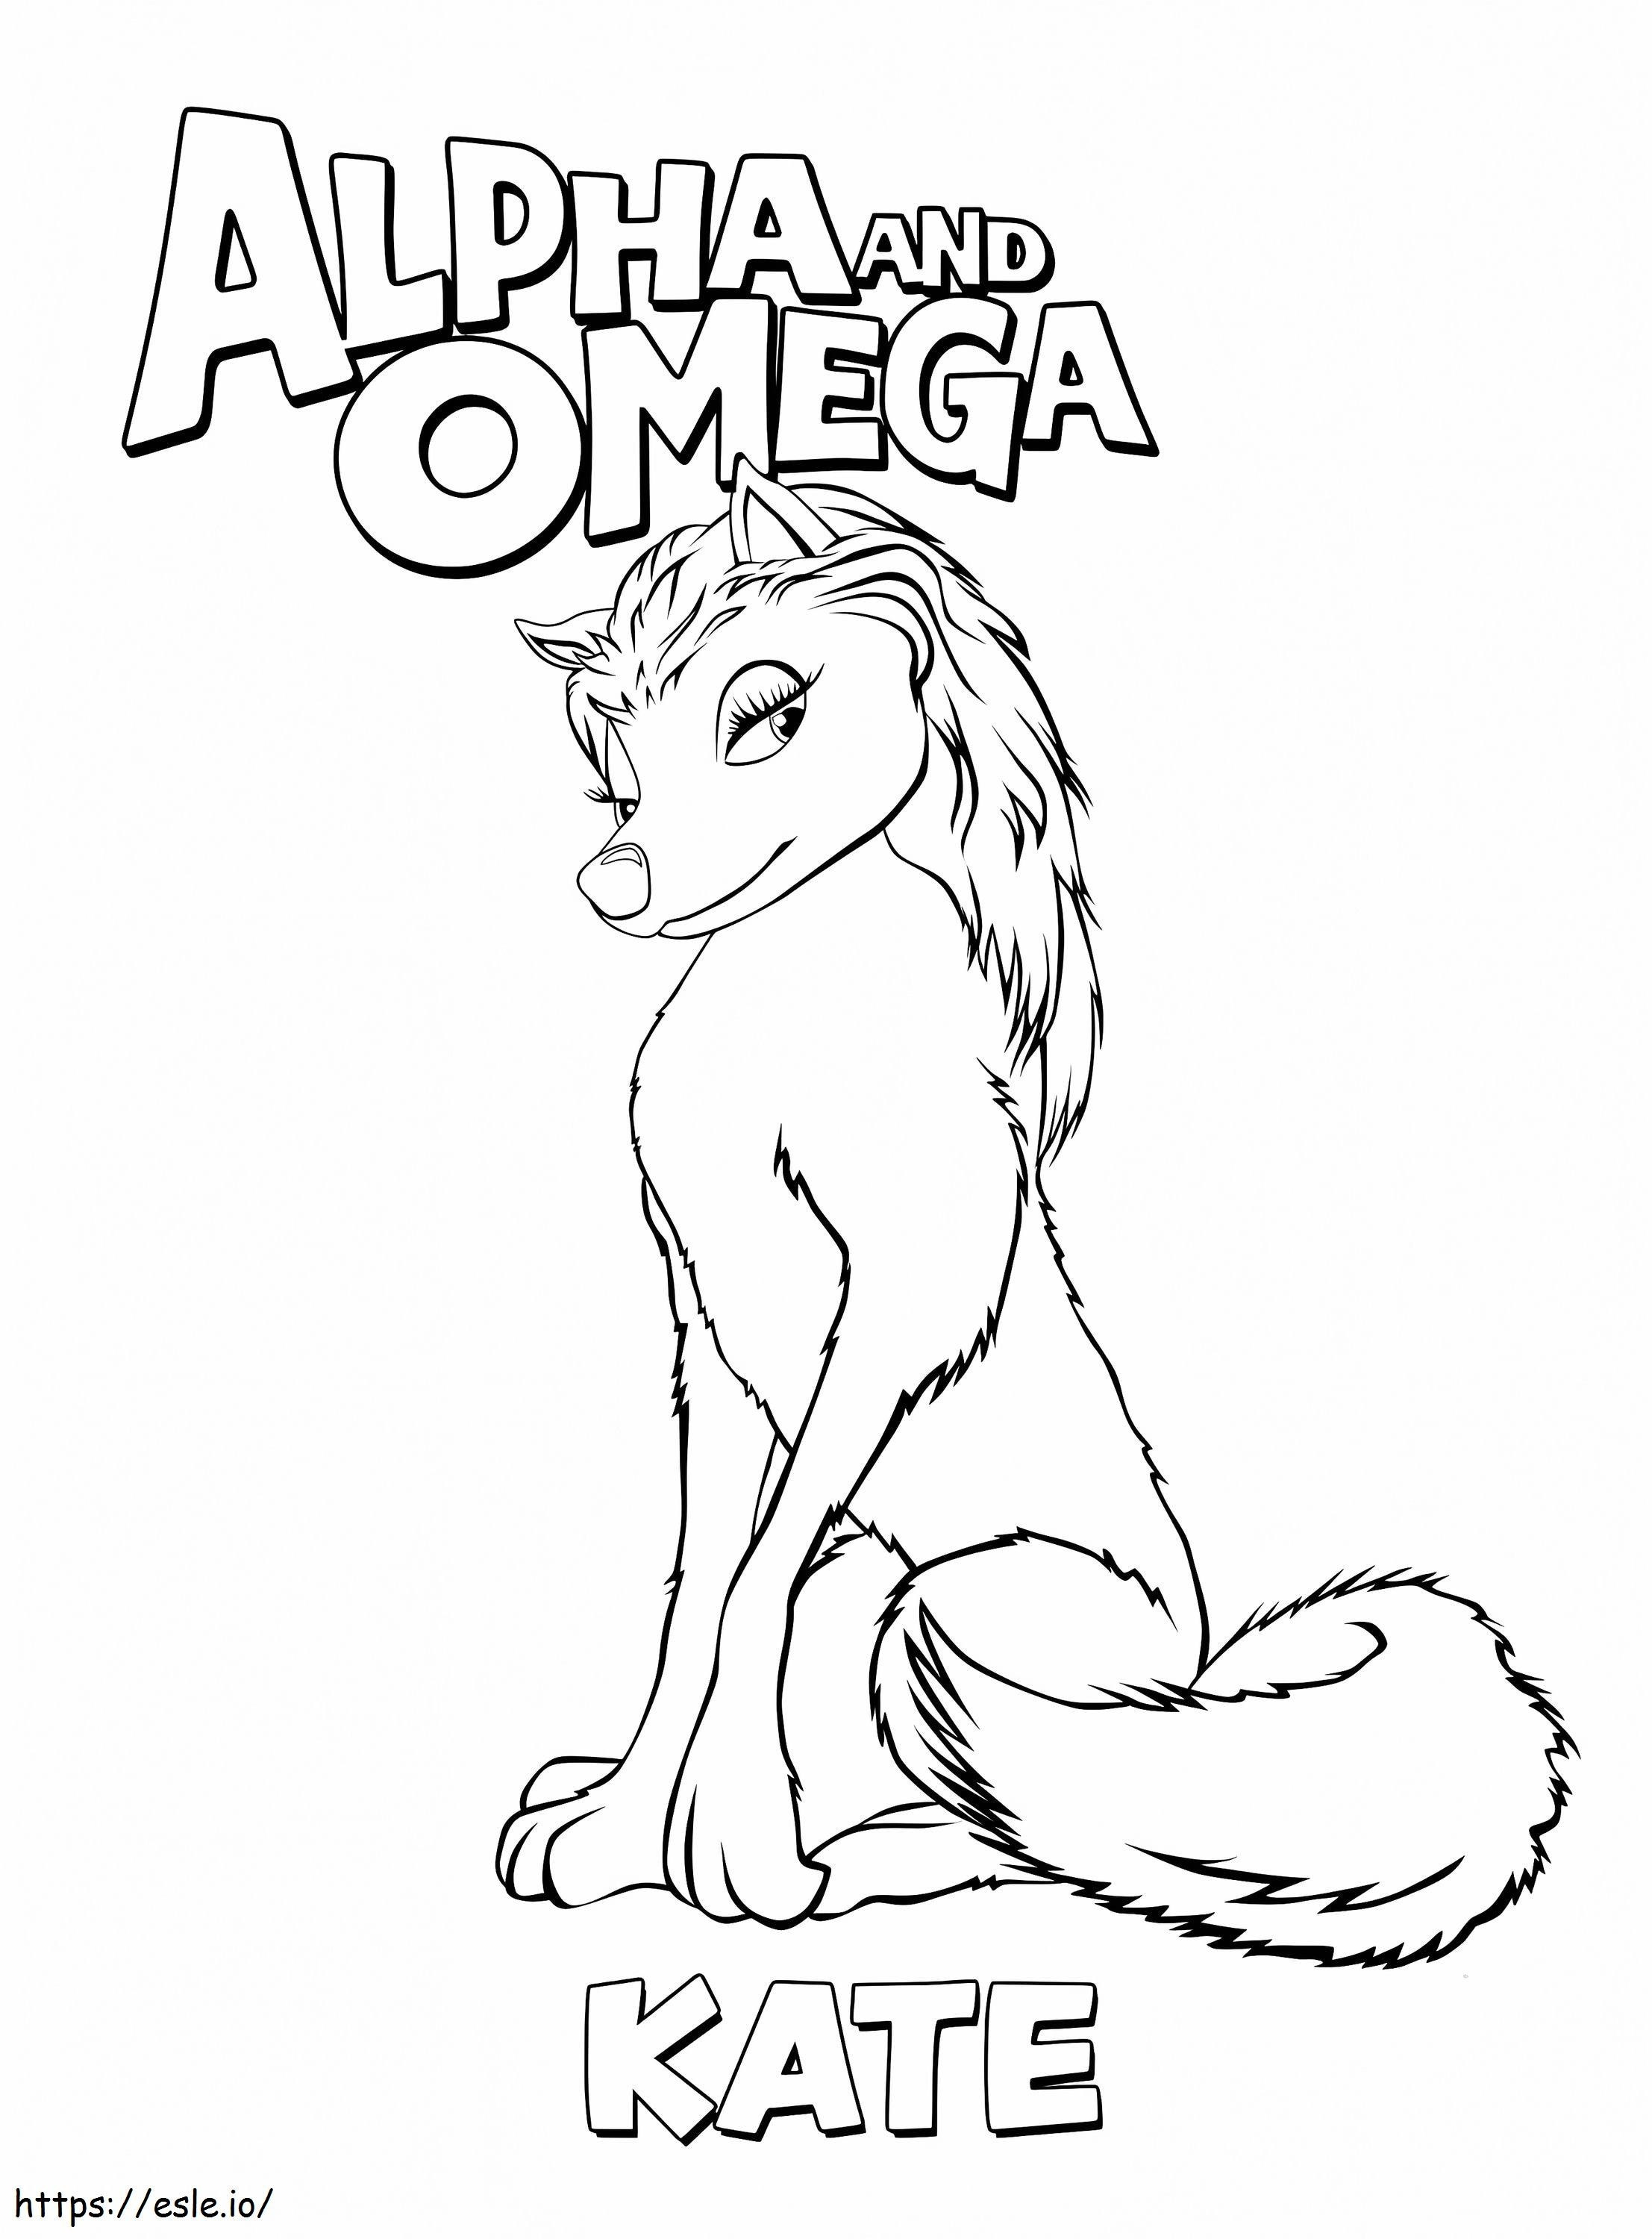 1591234283 Kate Alpha And Omega 37196790 1461 1980 coloring page